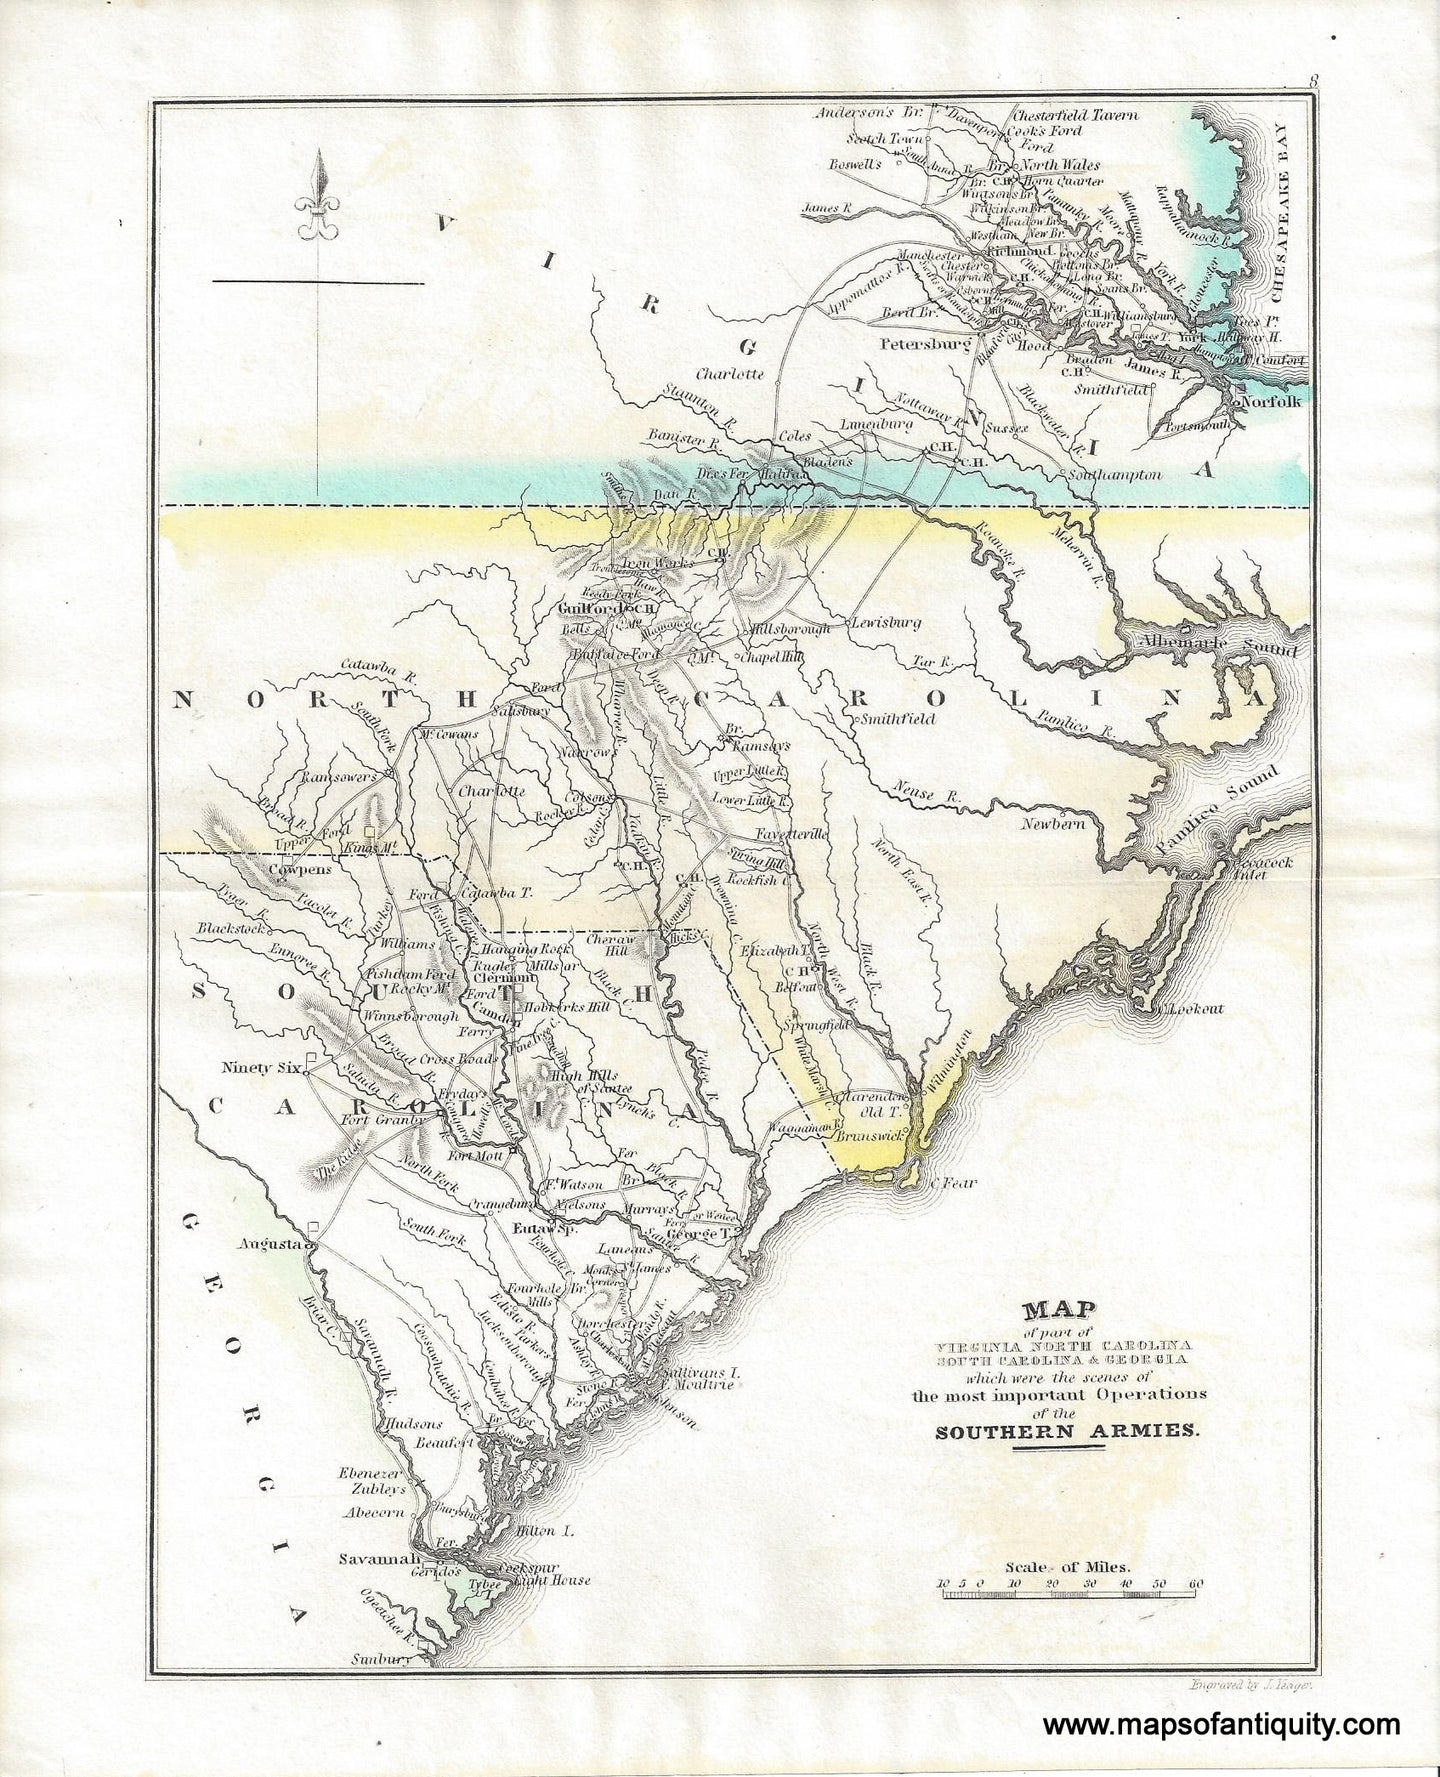 Antique-Hand-Colored-Map-Map of part of Virginia, North Carolina, South Carolina & Georgia. Which were the scenes of the Most Important Operations of the Southern Armies-1827-Marshall-Maps-Of-Antiquity-1800s-19th-century